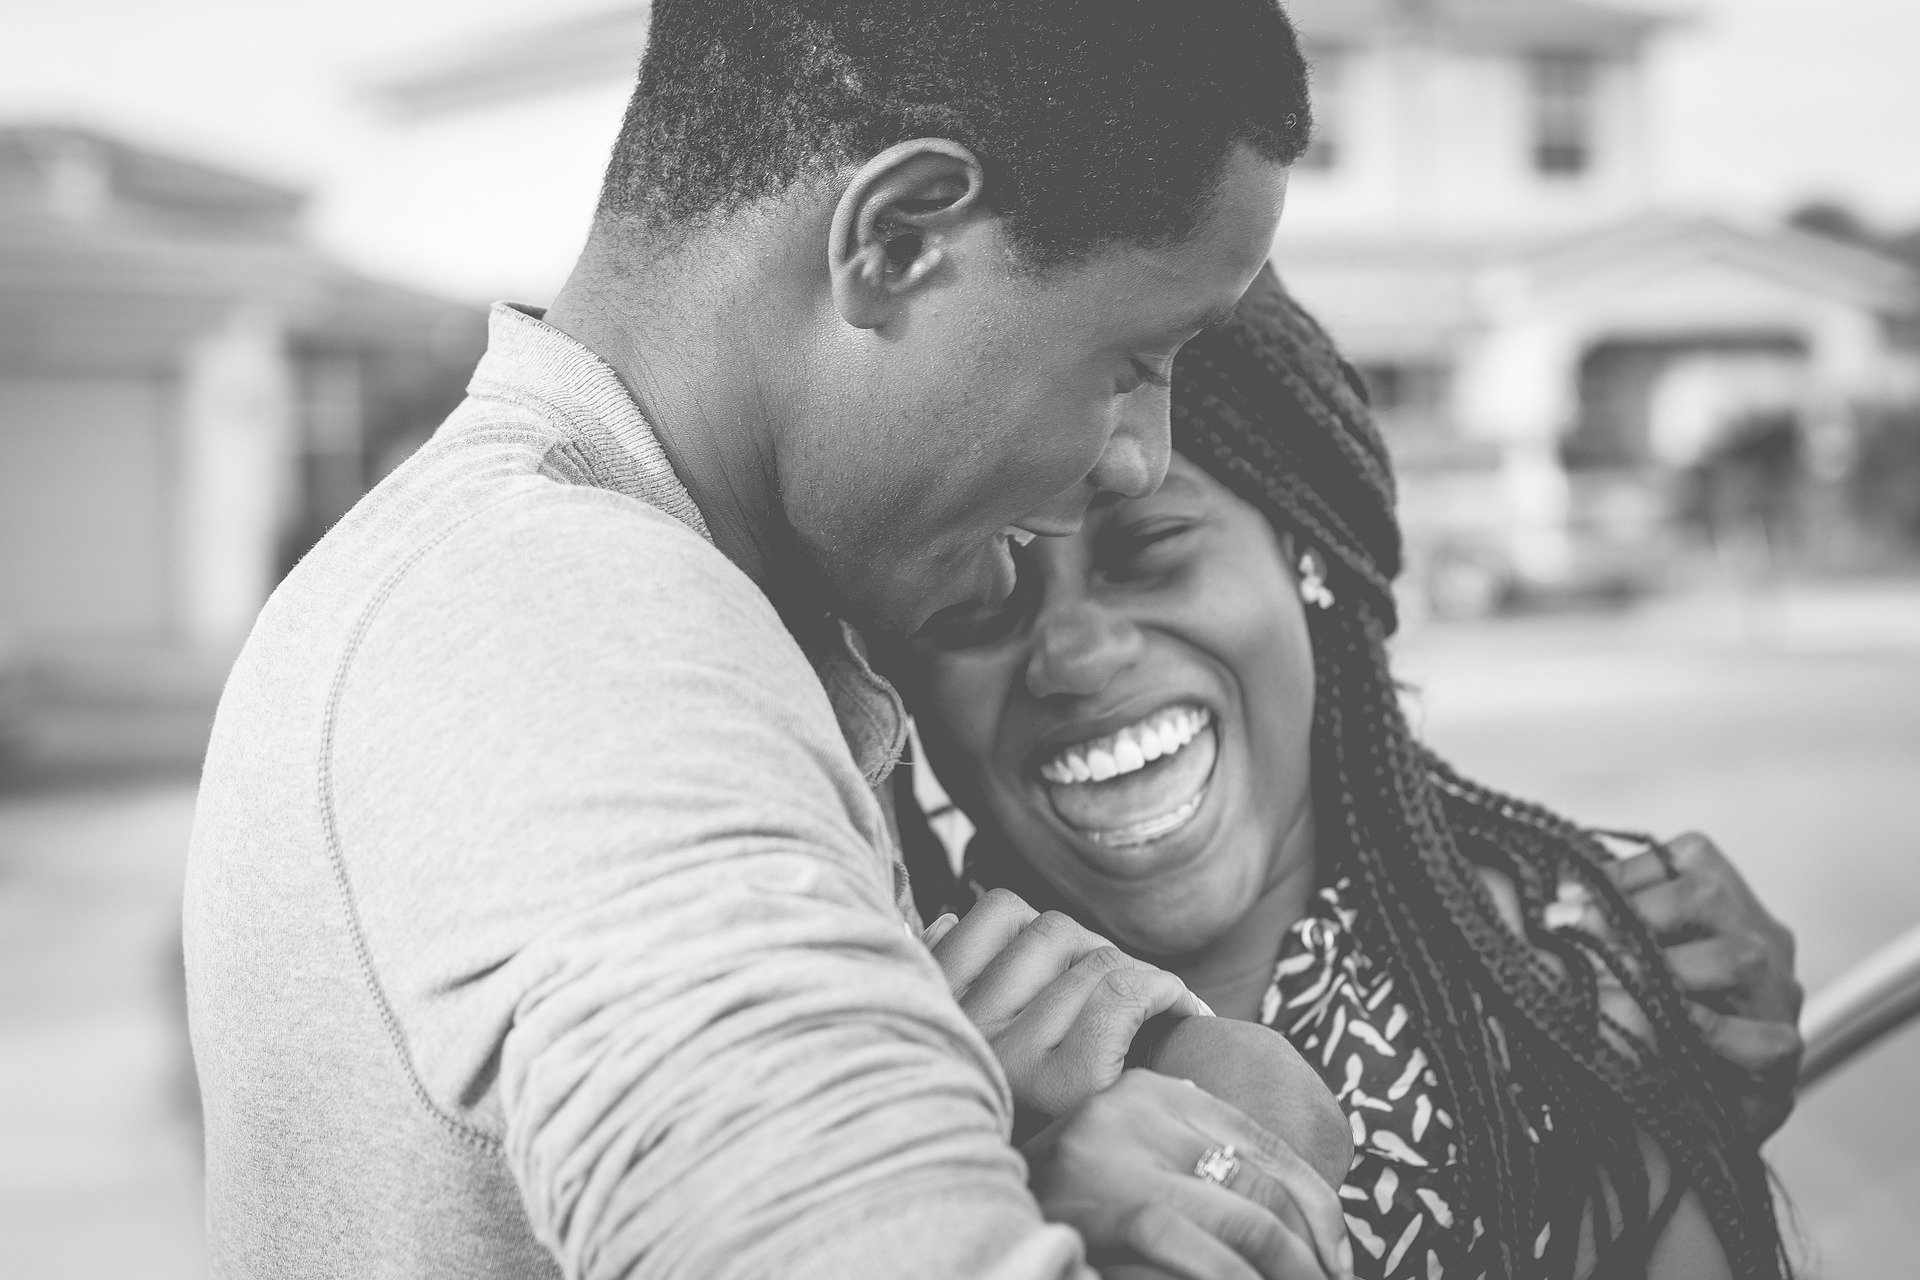 black and white image of BIPOC couple laughing and snuggling on the street